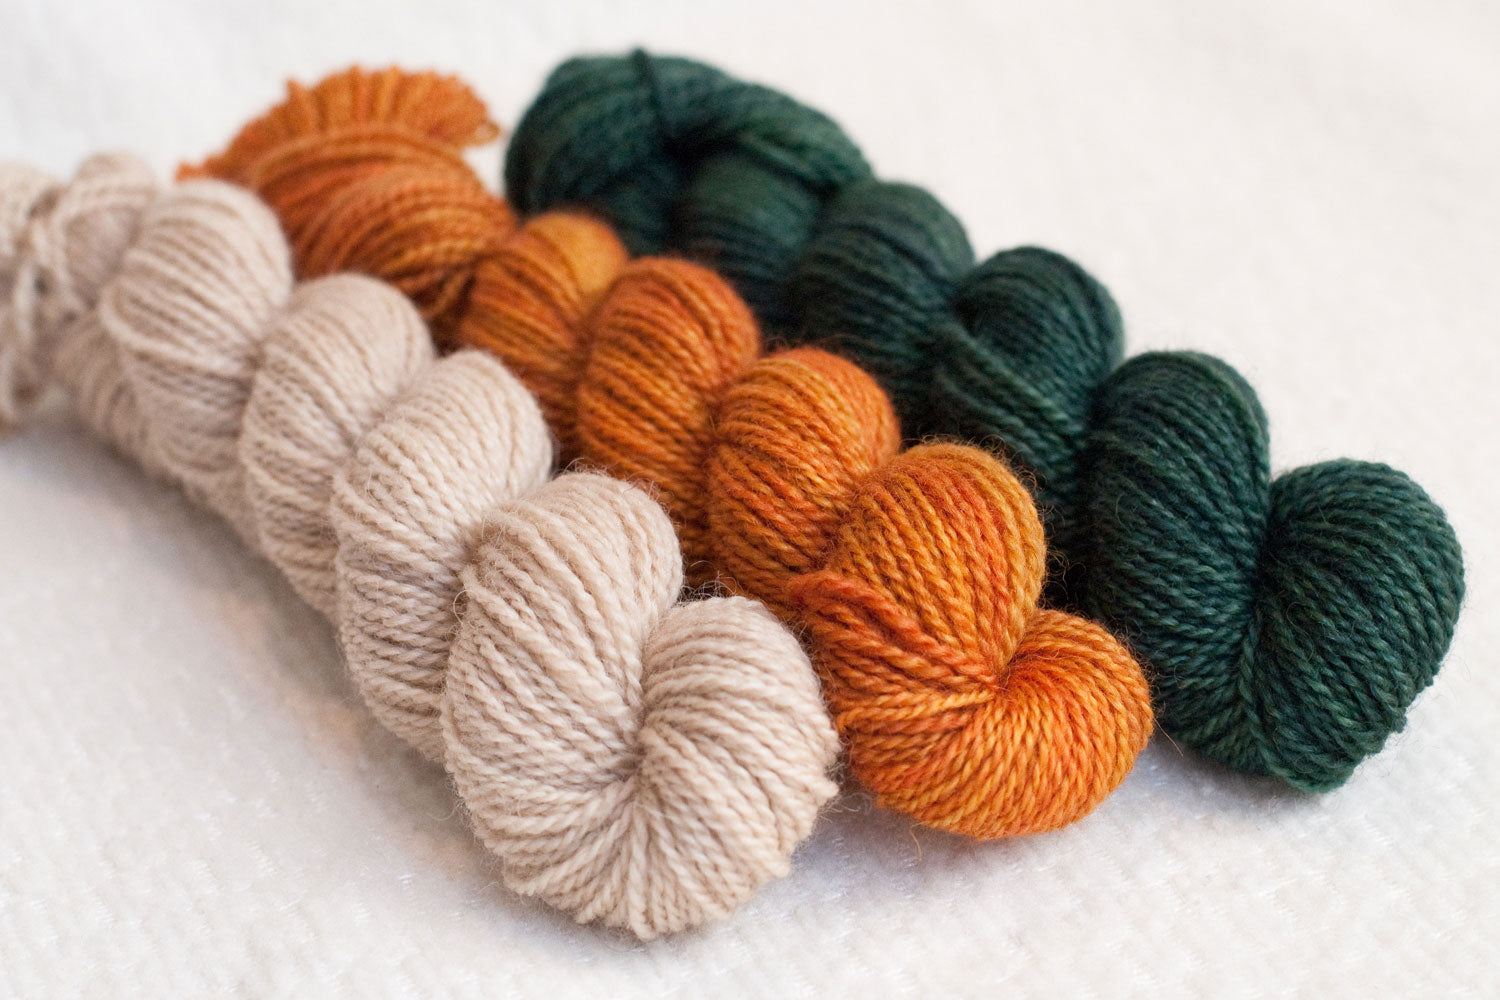 Pumpkin Patch gnome yarn set of three hand-dyed mini-skeins in cream, orange, and dark green, for gnomei mystery knitalong 9 with Imagined Landscapes